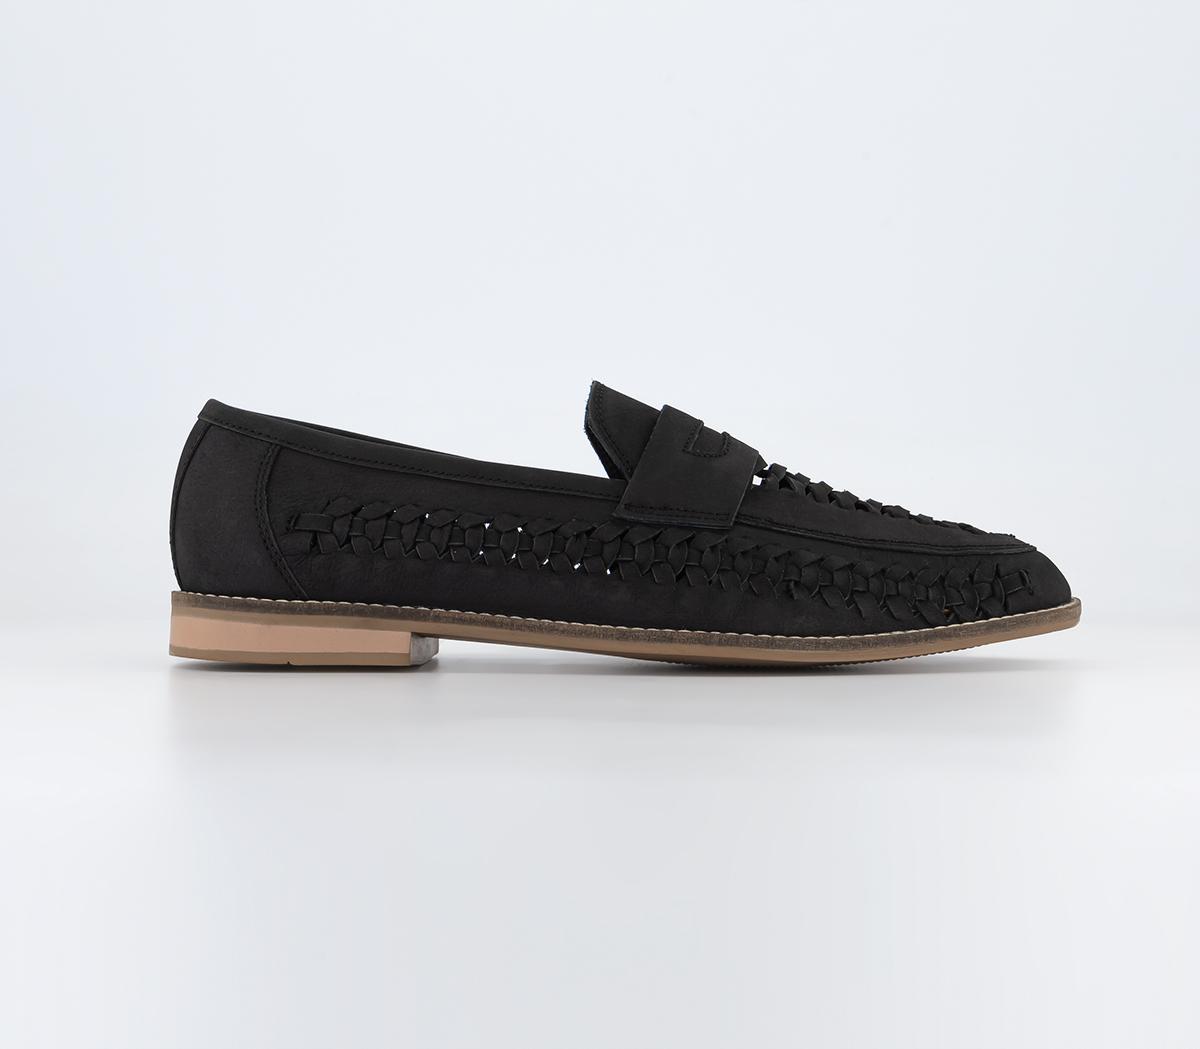 OFFICE Chiswick 2 Woven Saddle Shoes Black Nubuck - Men's Casual Shoes